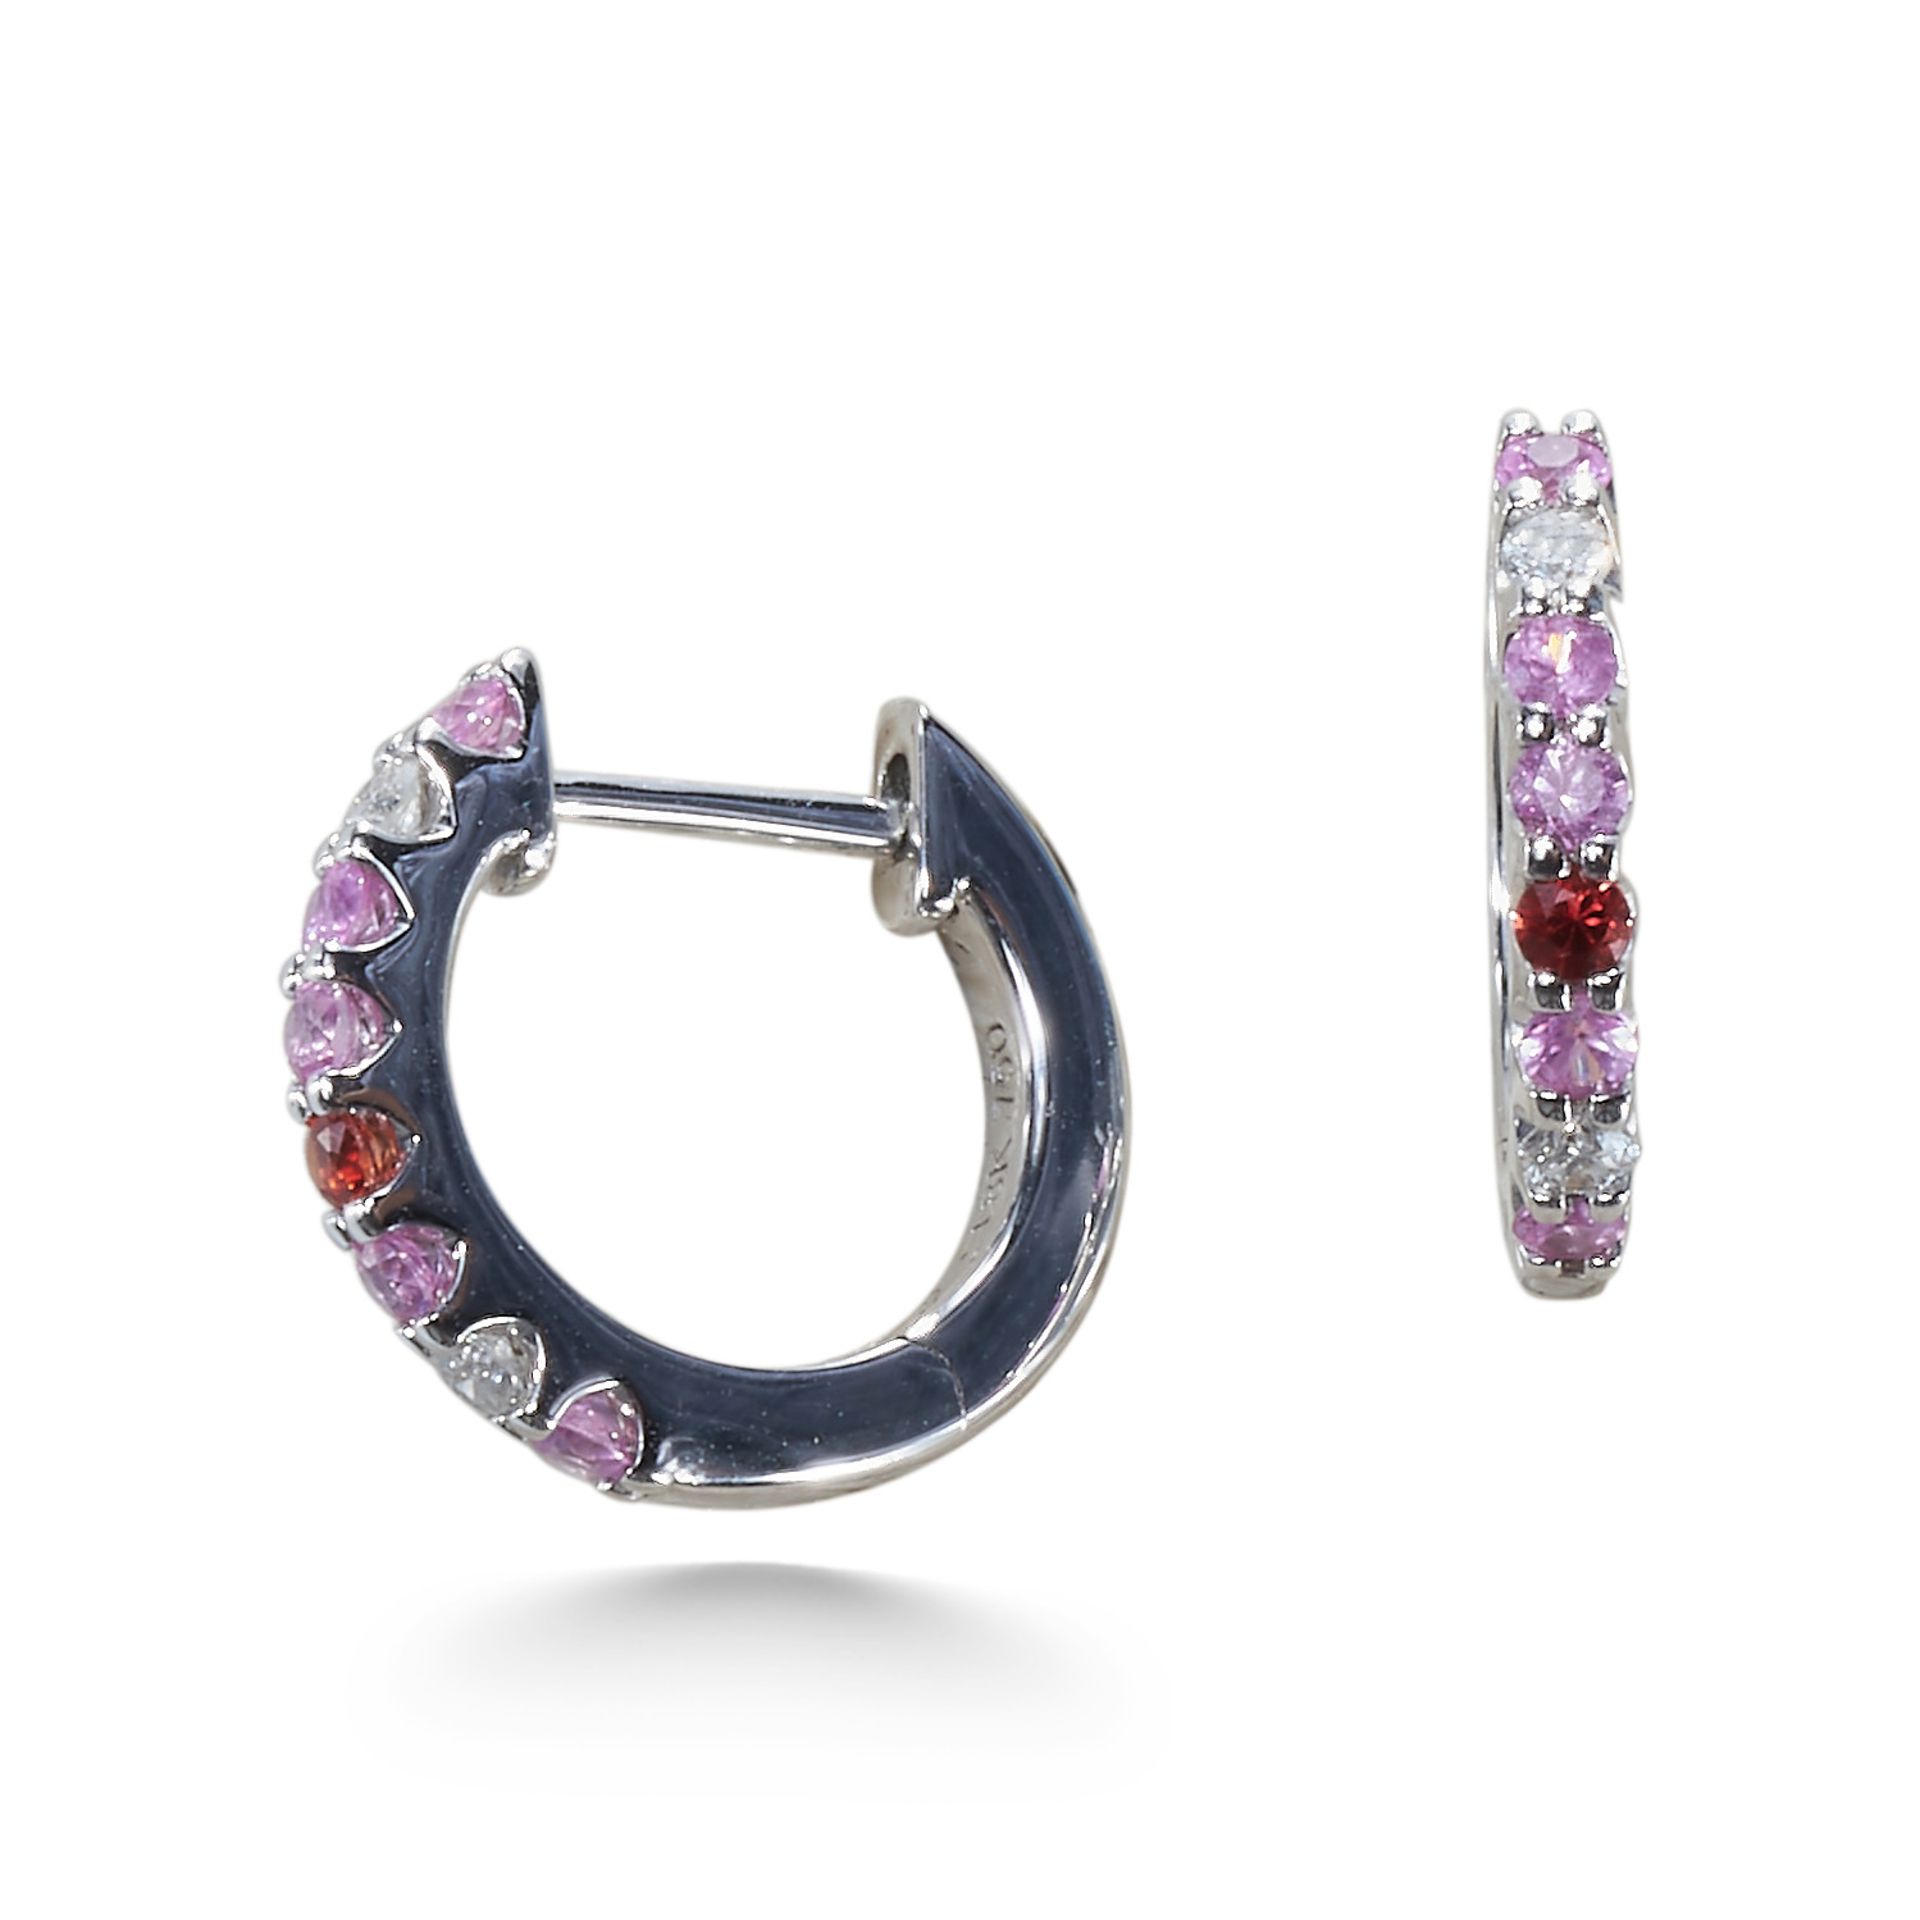 A PINK SAPPHIRE, RUBY AND DIAMOND HOOP EARRINGS, IN 18CT WHITE GOLD. - Image 2 of 2